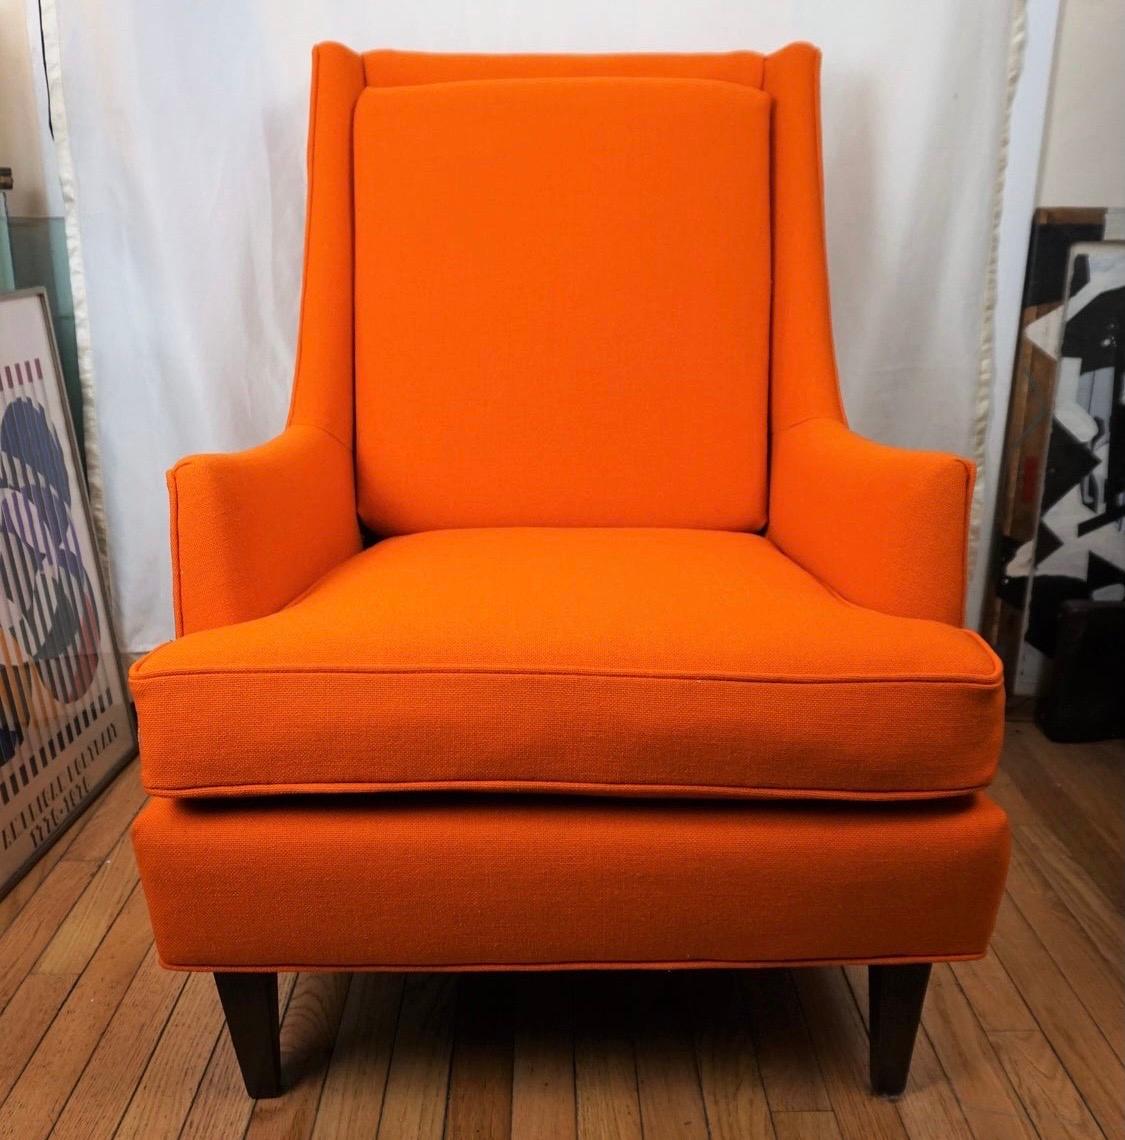 Recently reupholstered in a vibrant midcentury orange fabric and complete with James Inc. hallmarks below, this Milo Baughman stunner is guaranteed to set your home apart. Now, more than ever, home is where the heart is.